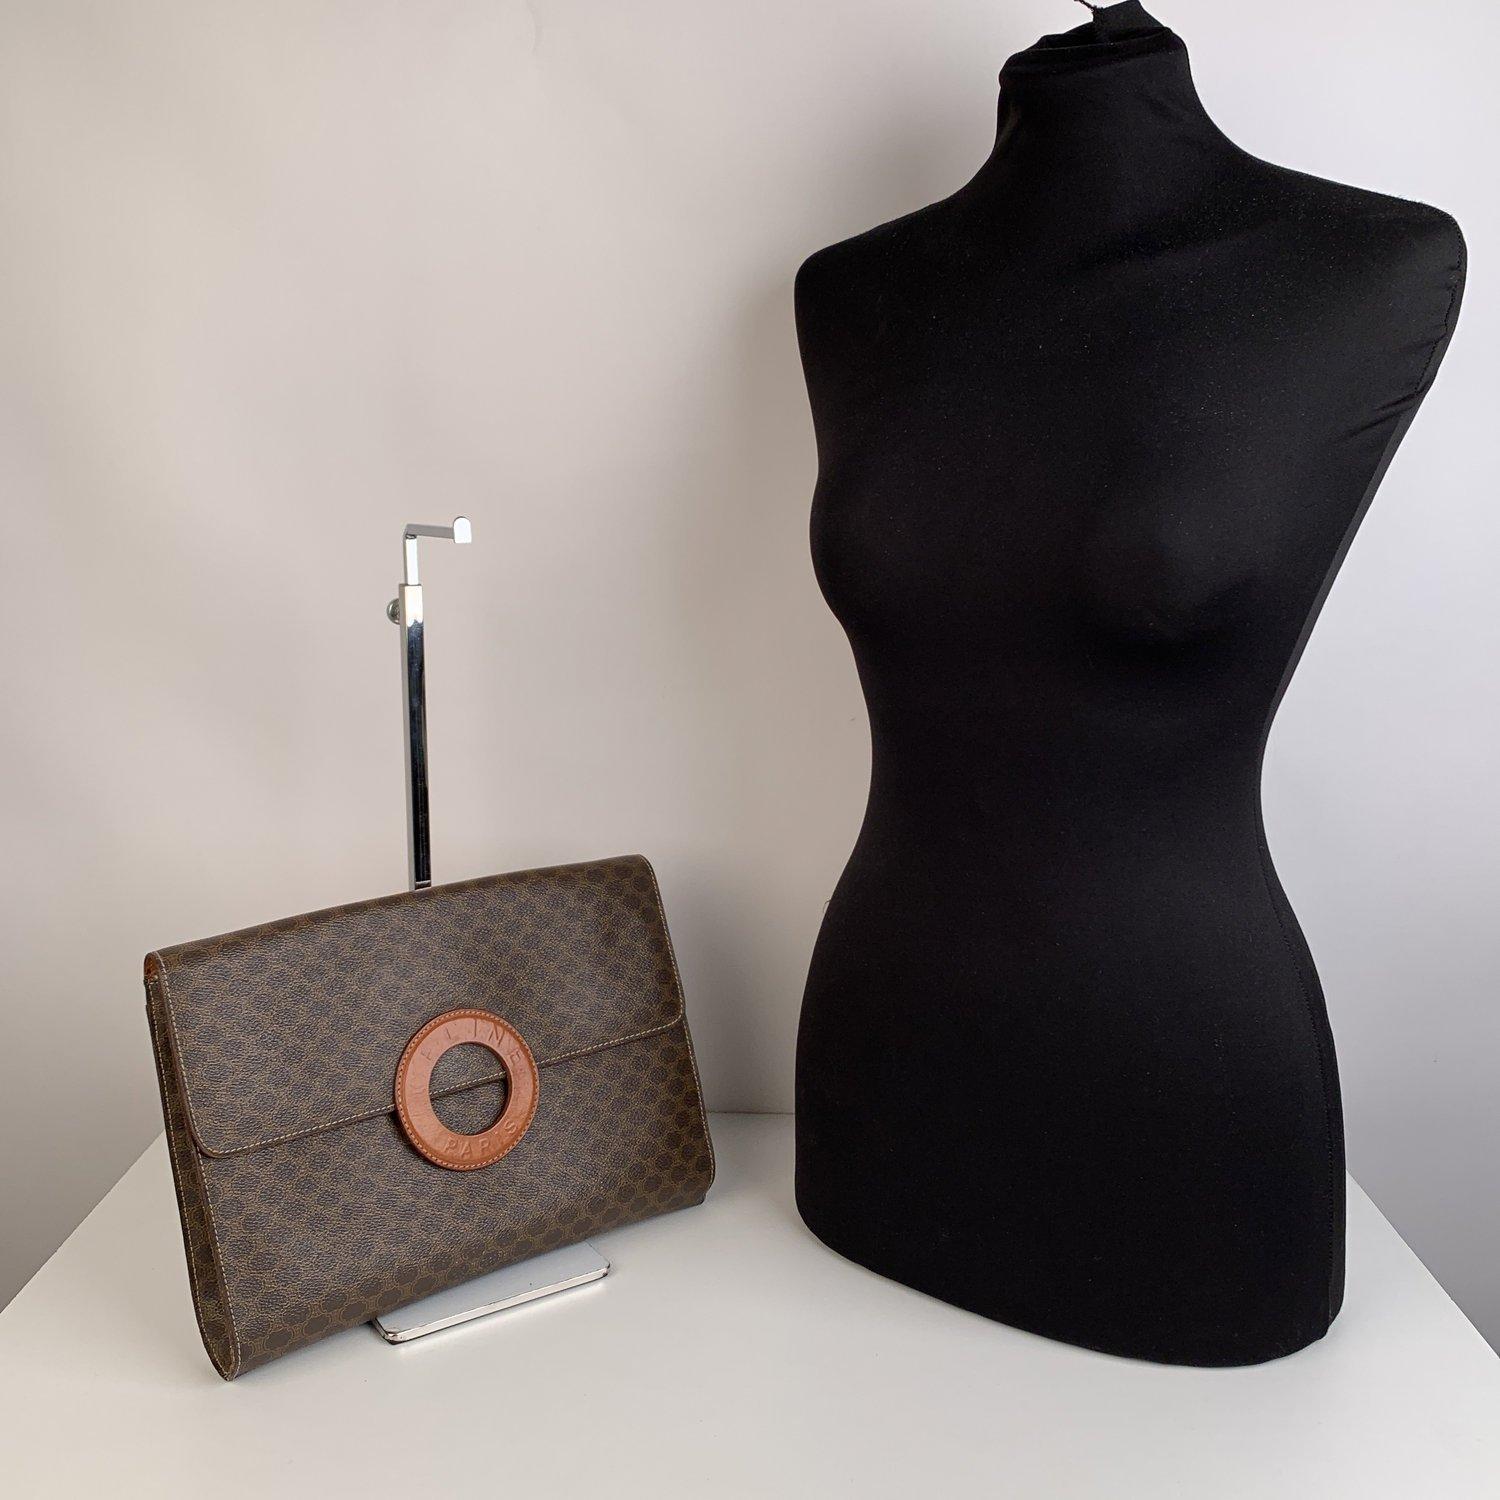 MATERIAL: Canvas COLOR: Brown MODEL: Clutch Bag GENDER: Women SIZE: Small Condition B - VERY GOOD Some light wear of use - some wear of use on bottom corners (the left corner shows 2 missing stitch). Some darkness and light scratches on the reverse